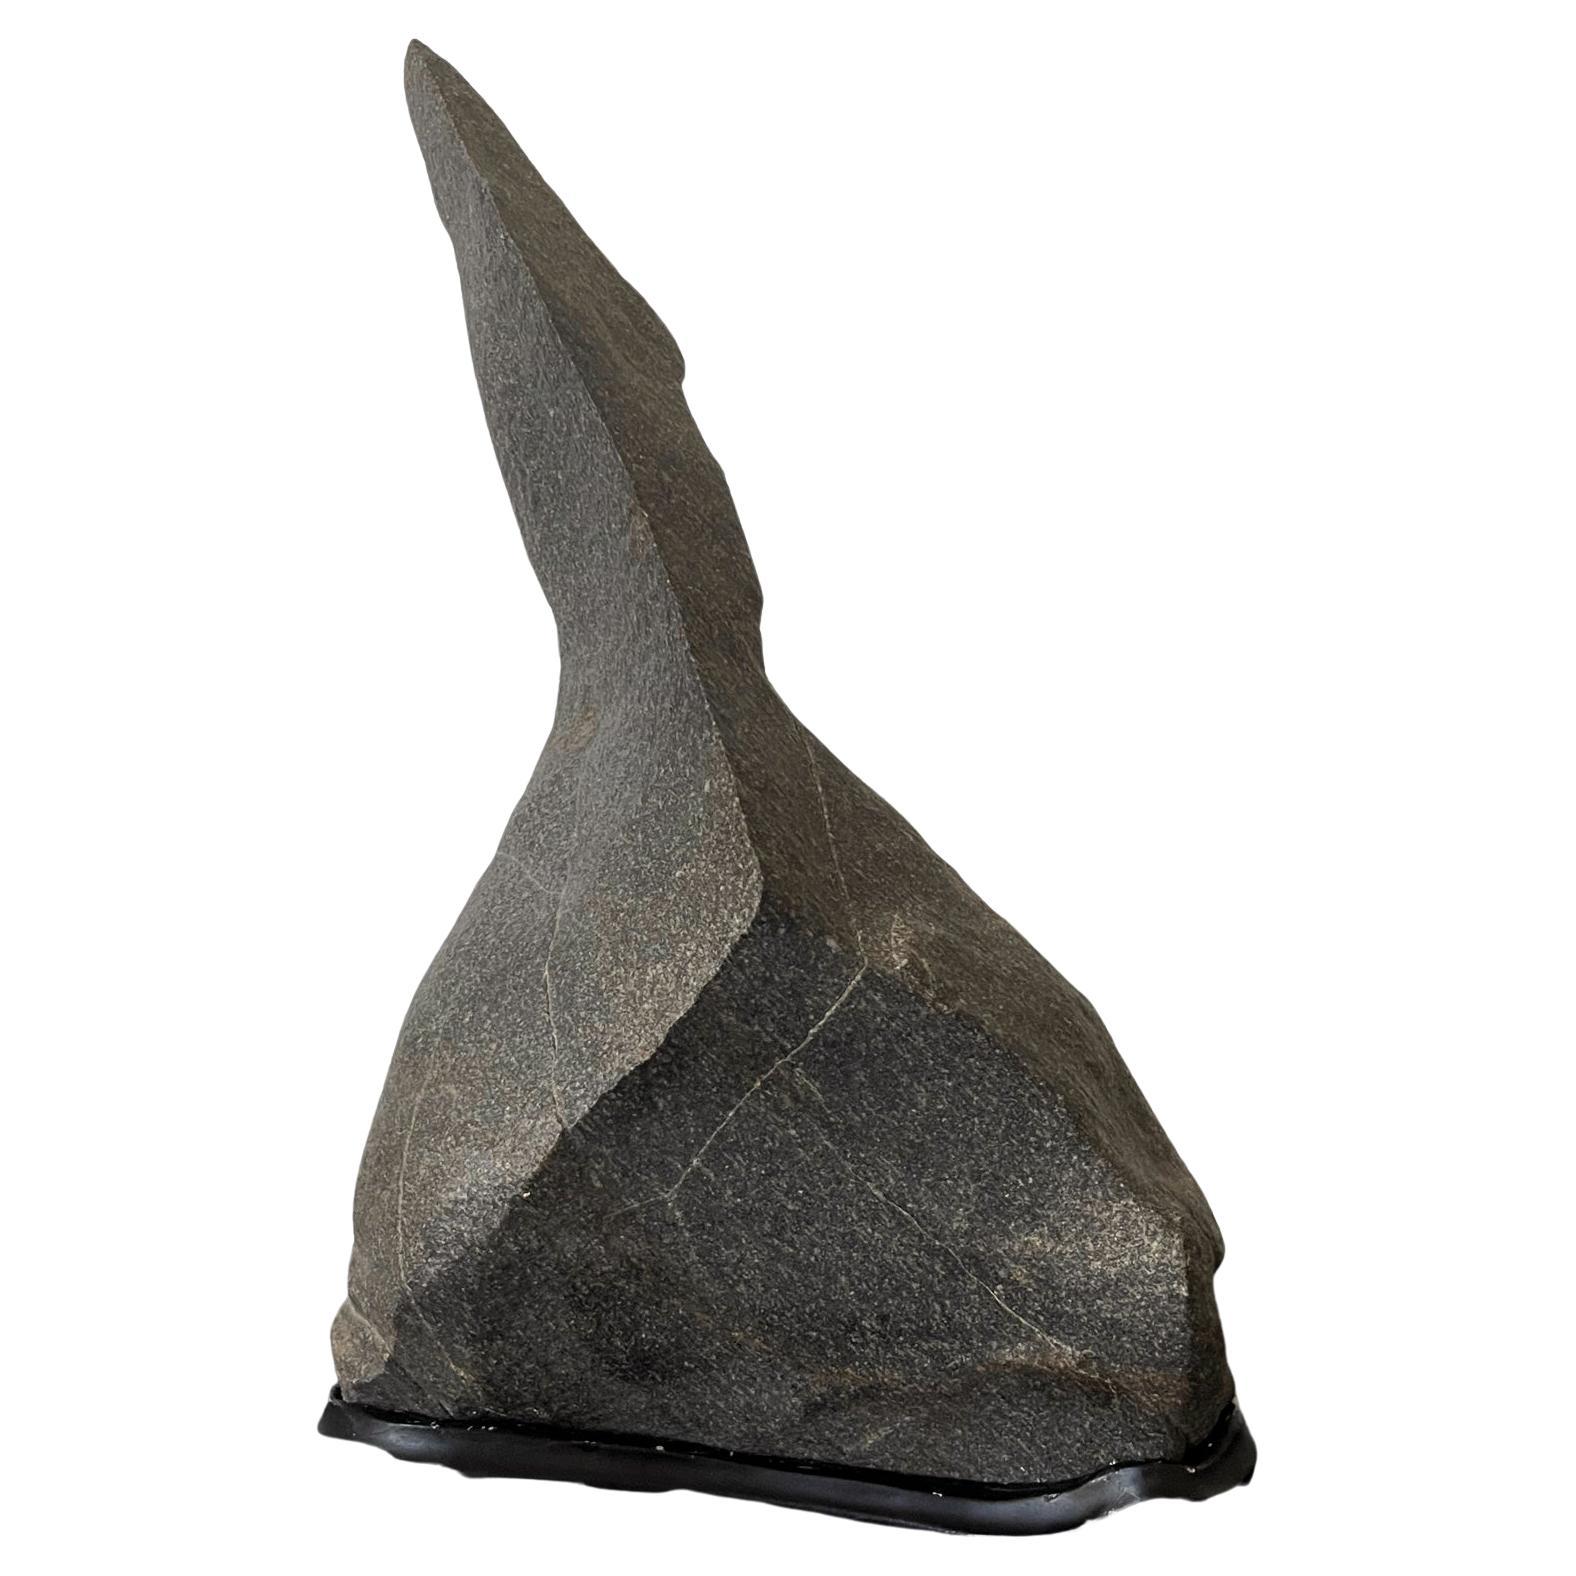 Abstract Scholar Rock Viewing Stone on Wood Stand